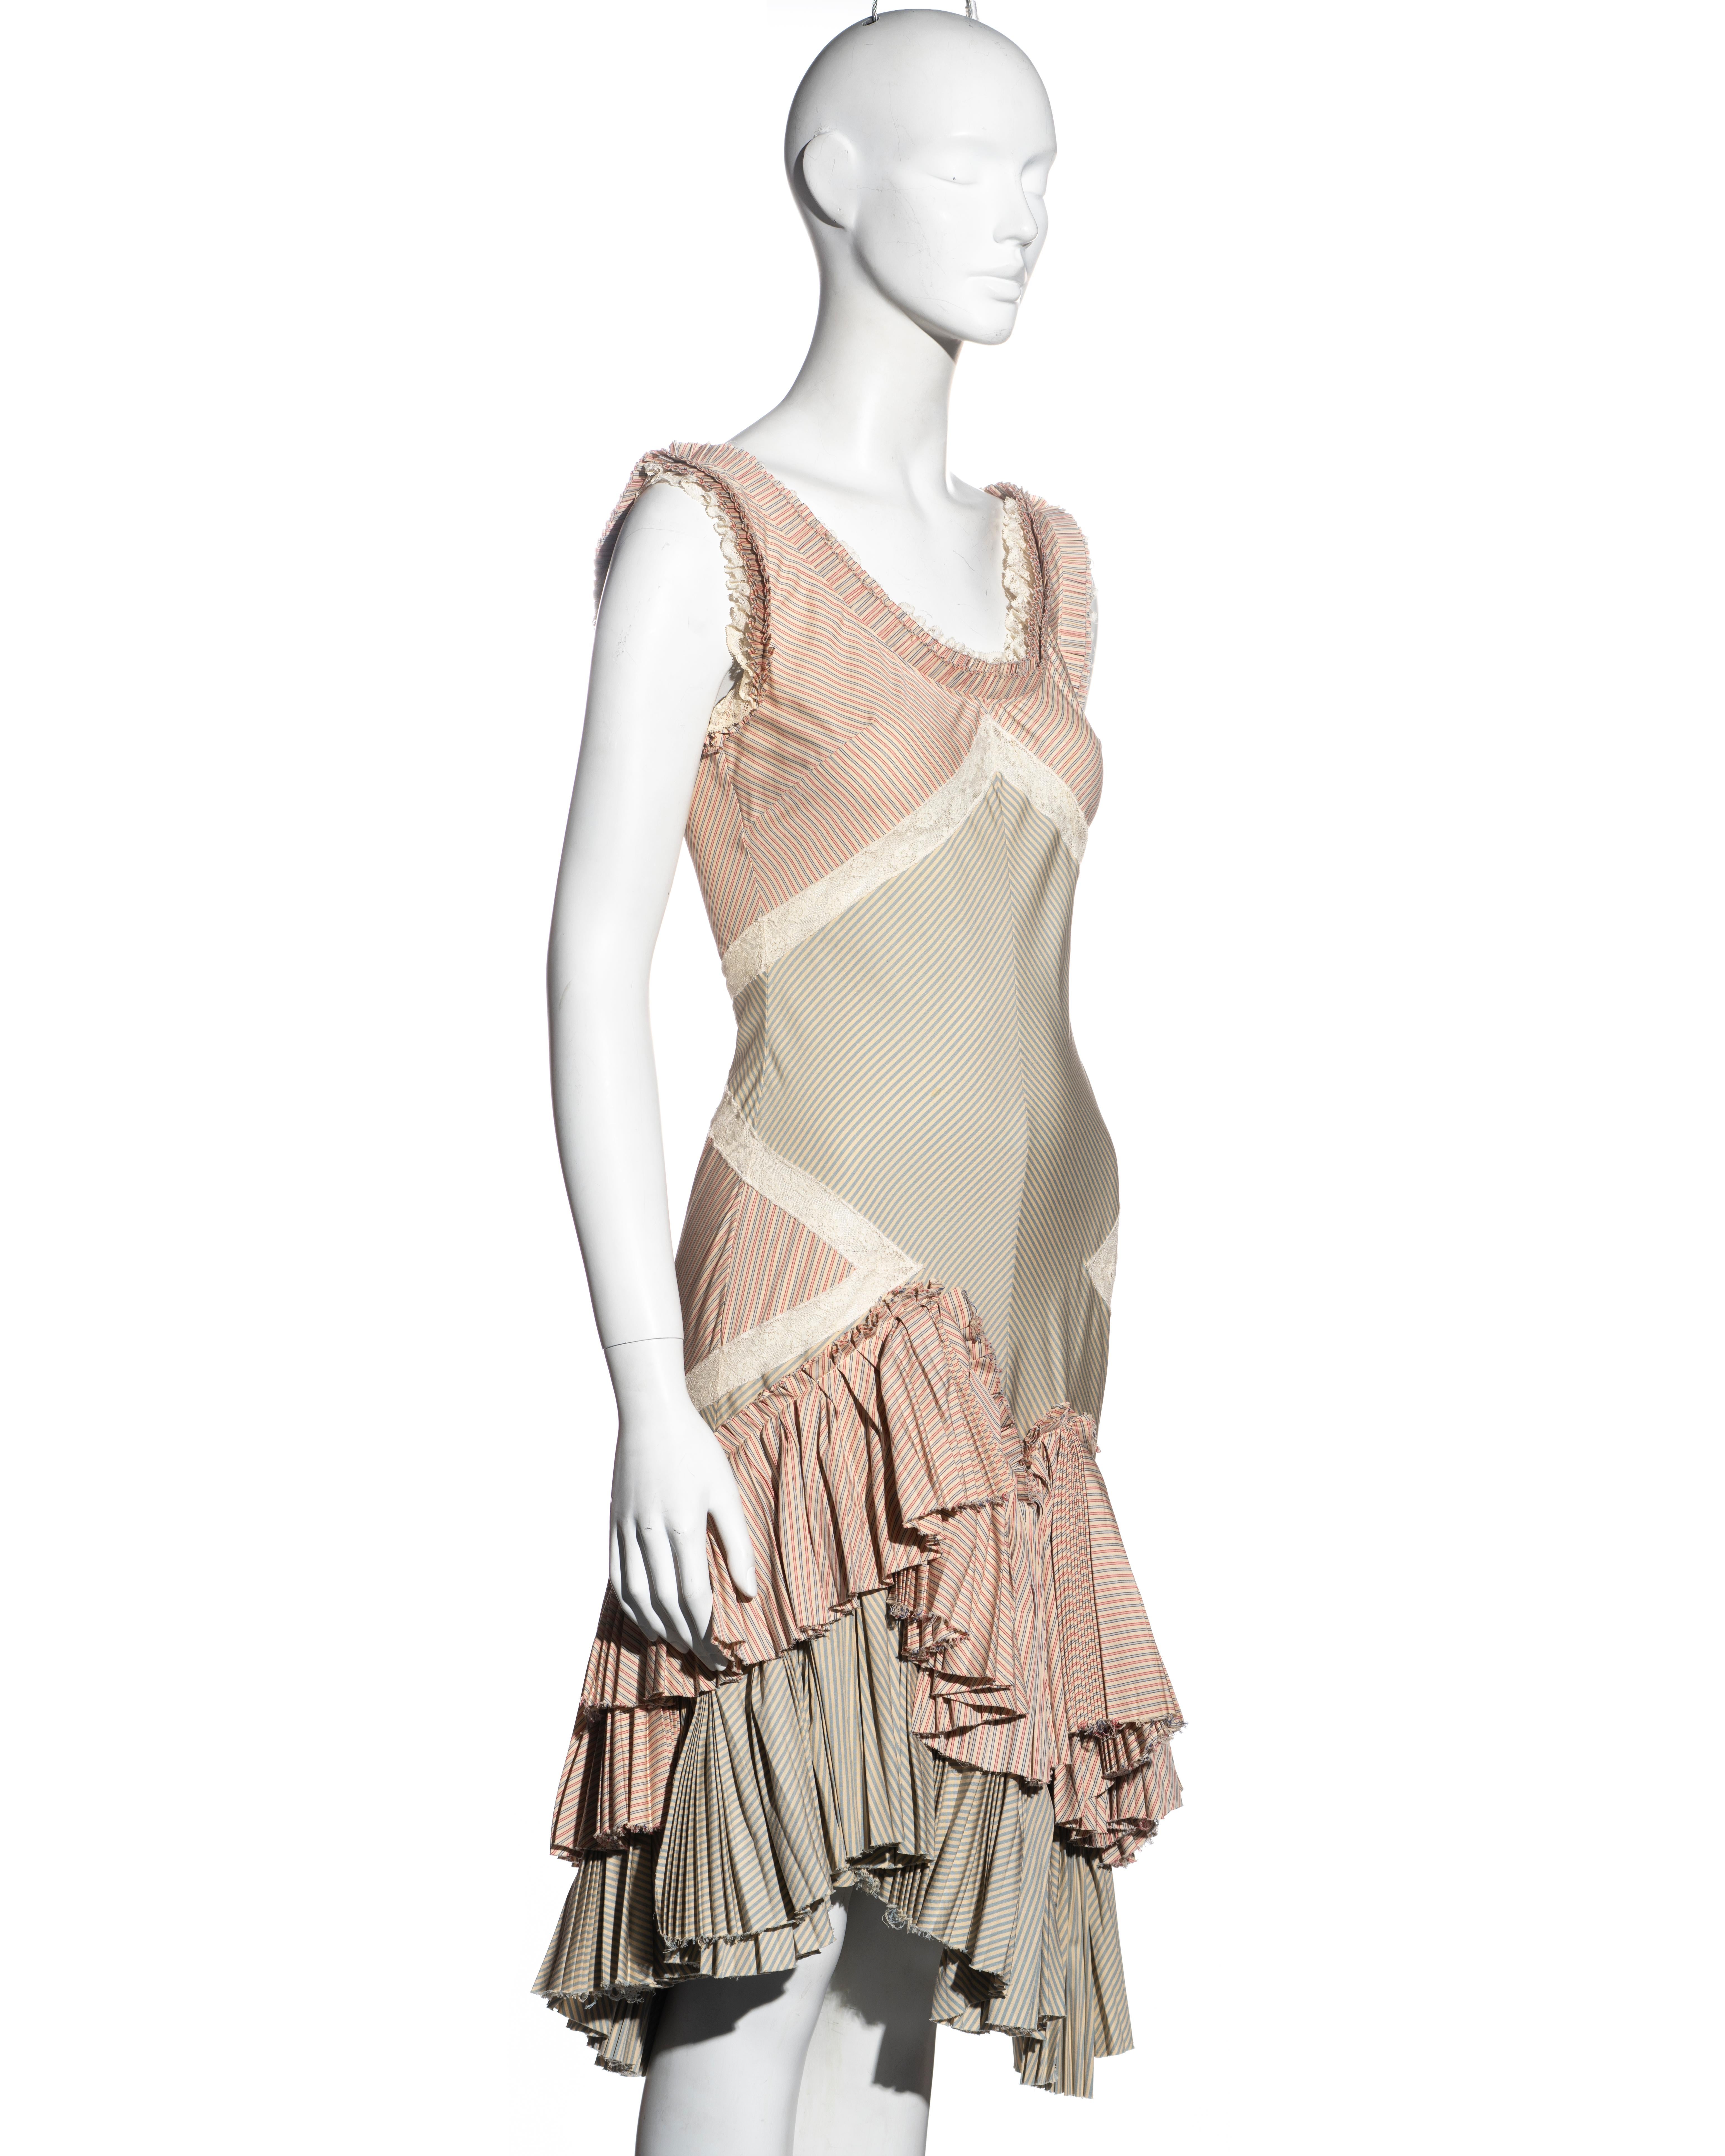 Alexander McQueen striped cotton and lace dress with pleated skirt, ss 2005 In Excellent Condition For Sale In London, GB